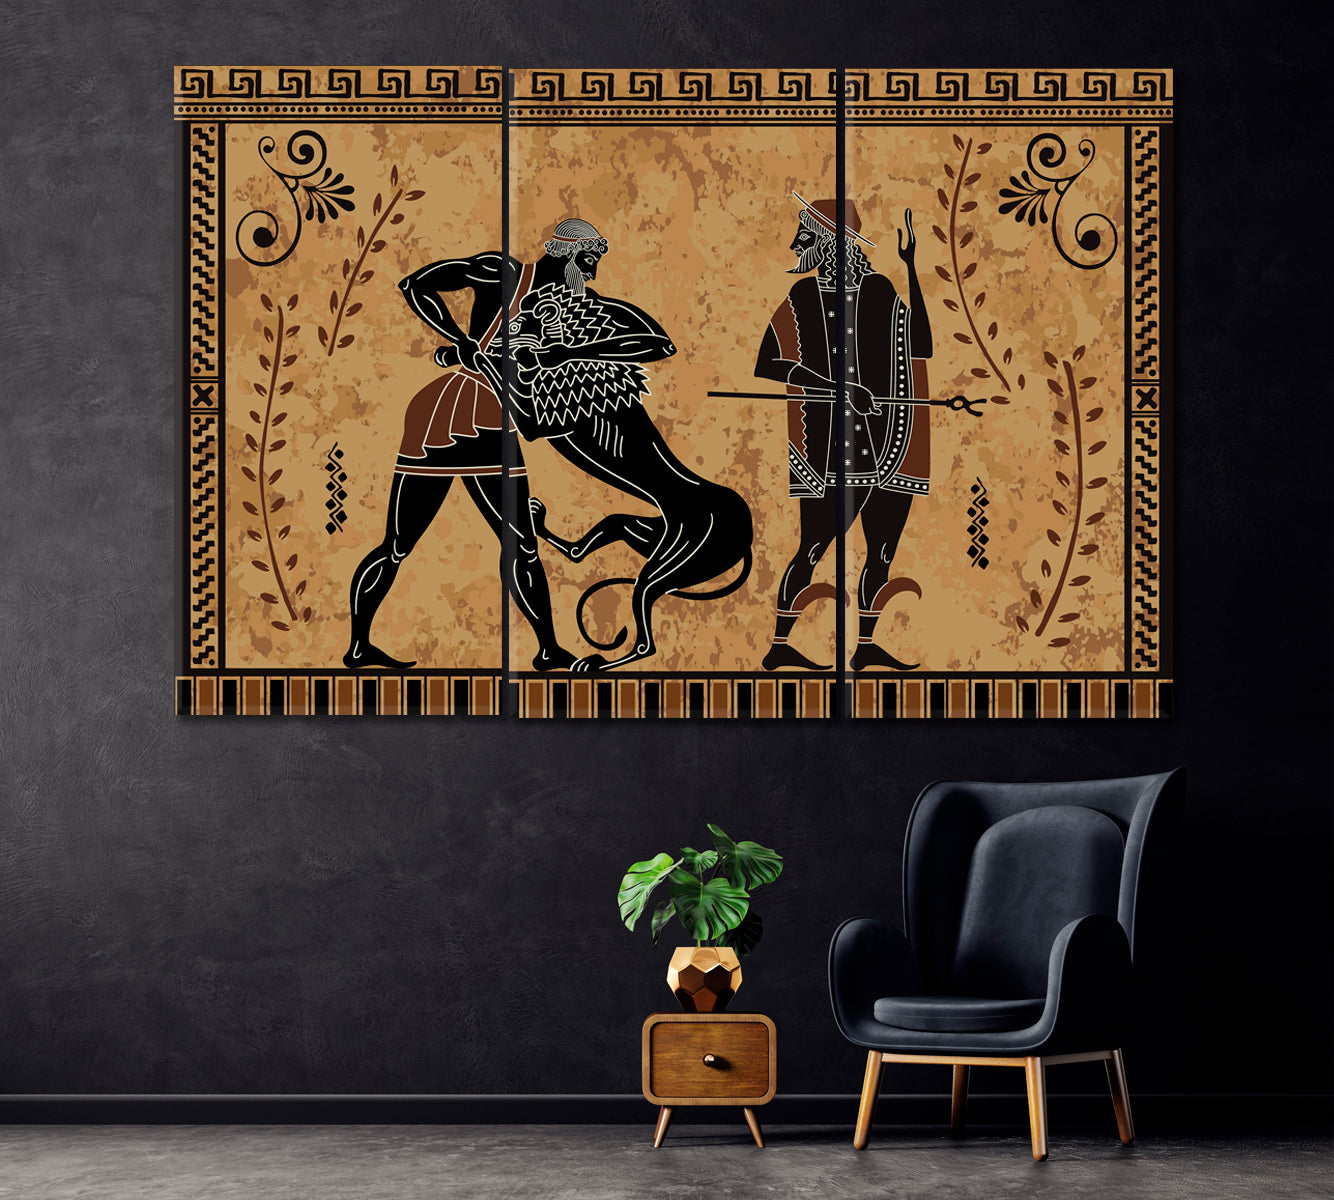 Ancient Greece Scene Canvas Print ArtLexy 3 Panels 36"x24" inches 